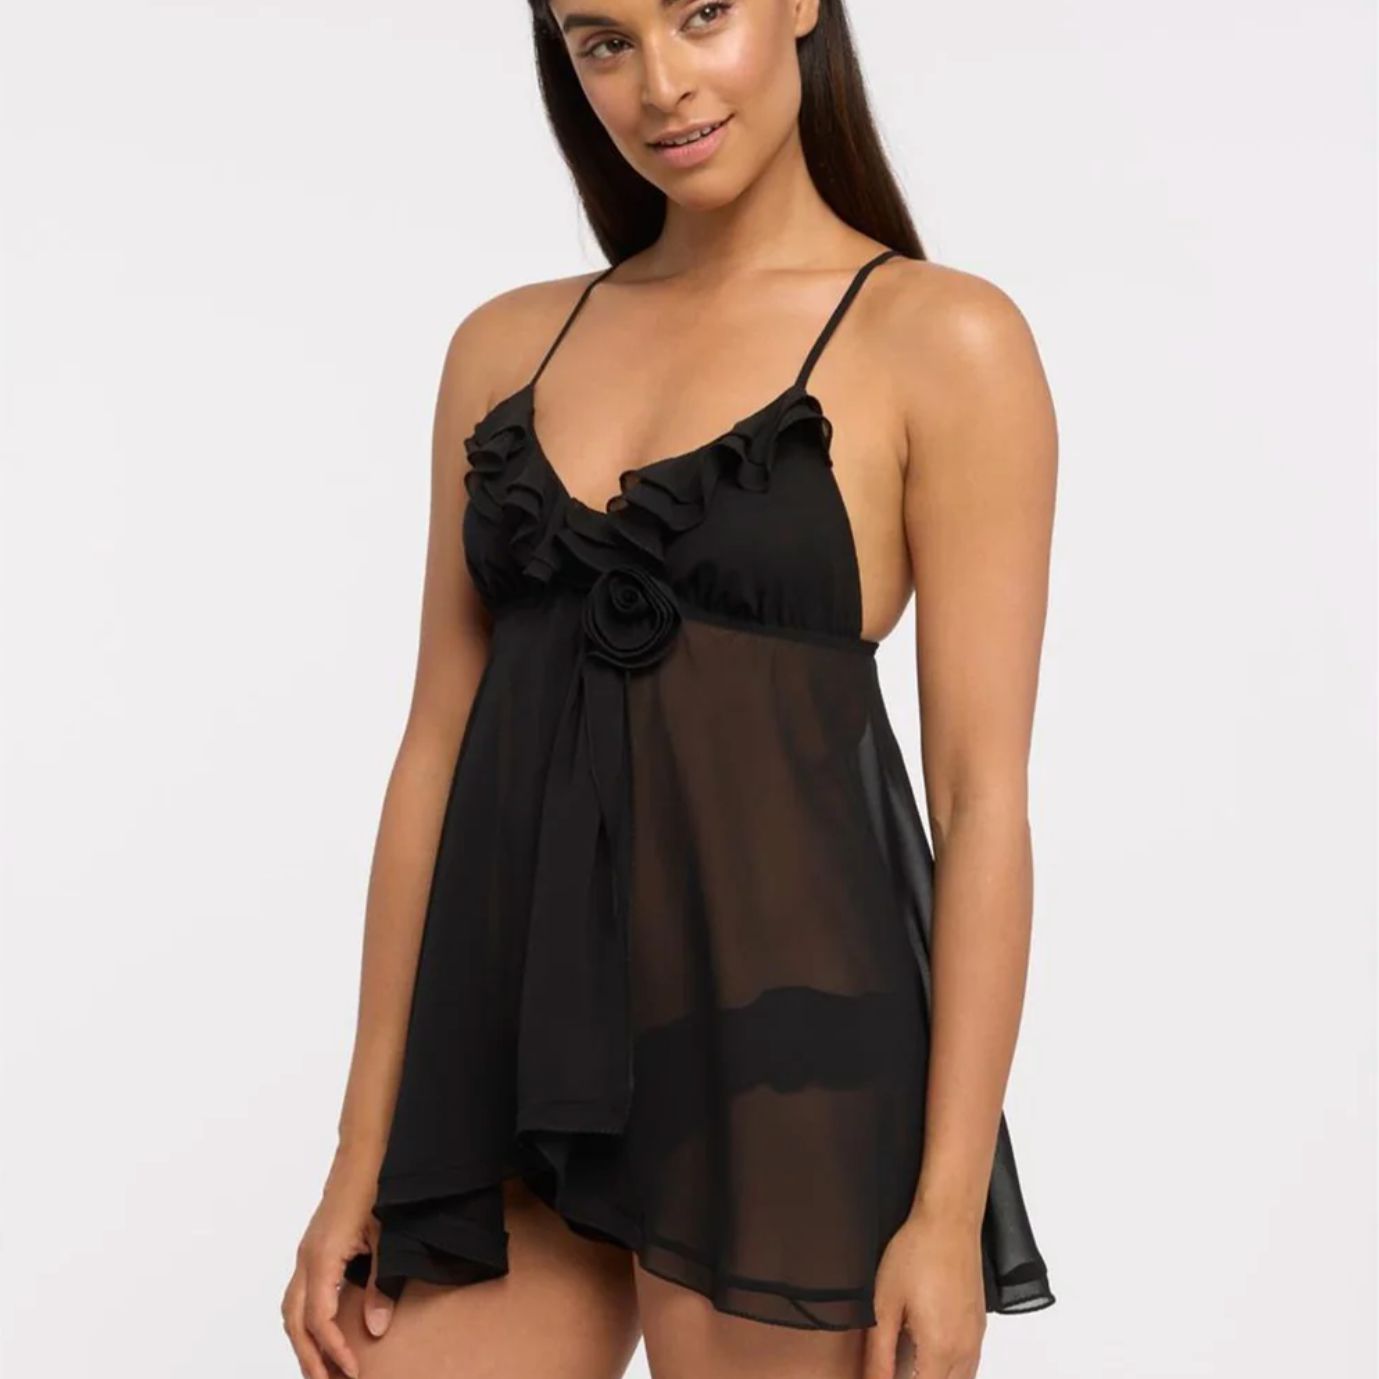 Rya Collection Charleston Babydoll 853-Loungewear-Rya Collection-Black-XSmall-Anna Bella Fine Lingerie, Reveal Your Most Gorgeous Self!